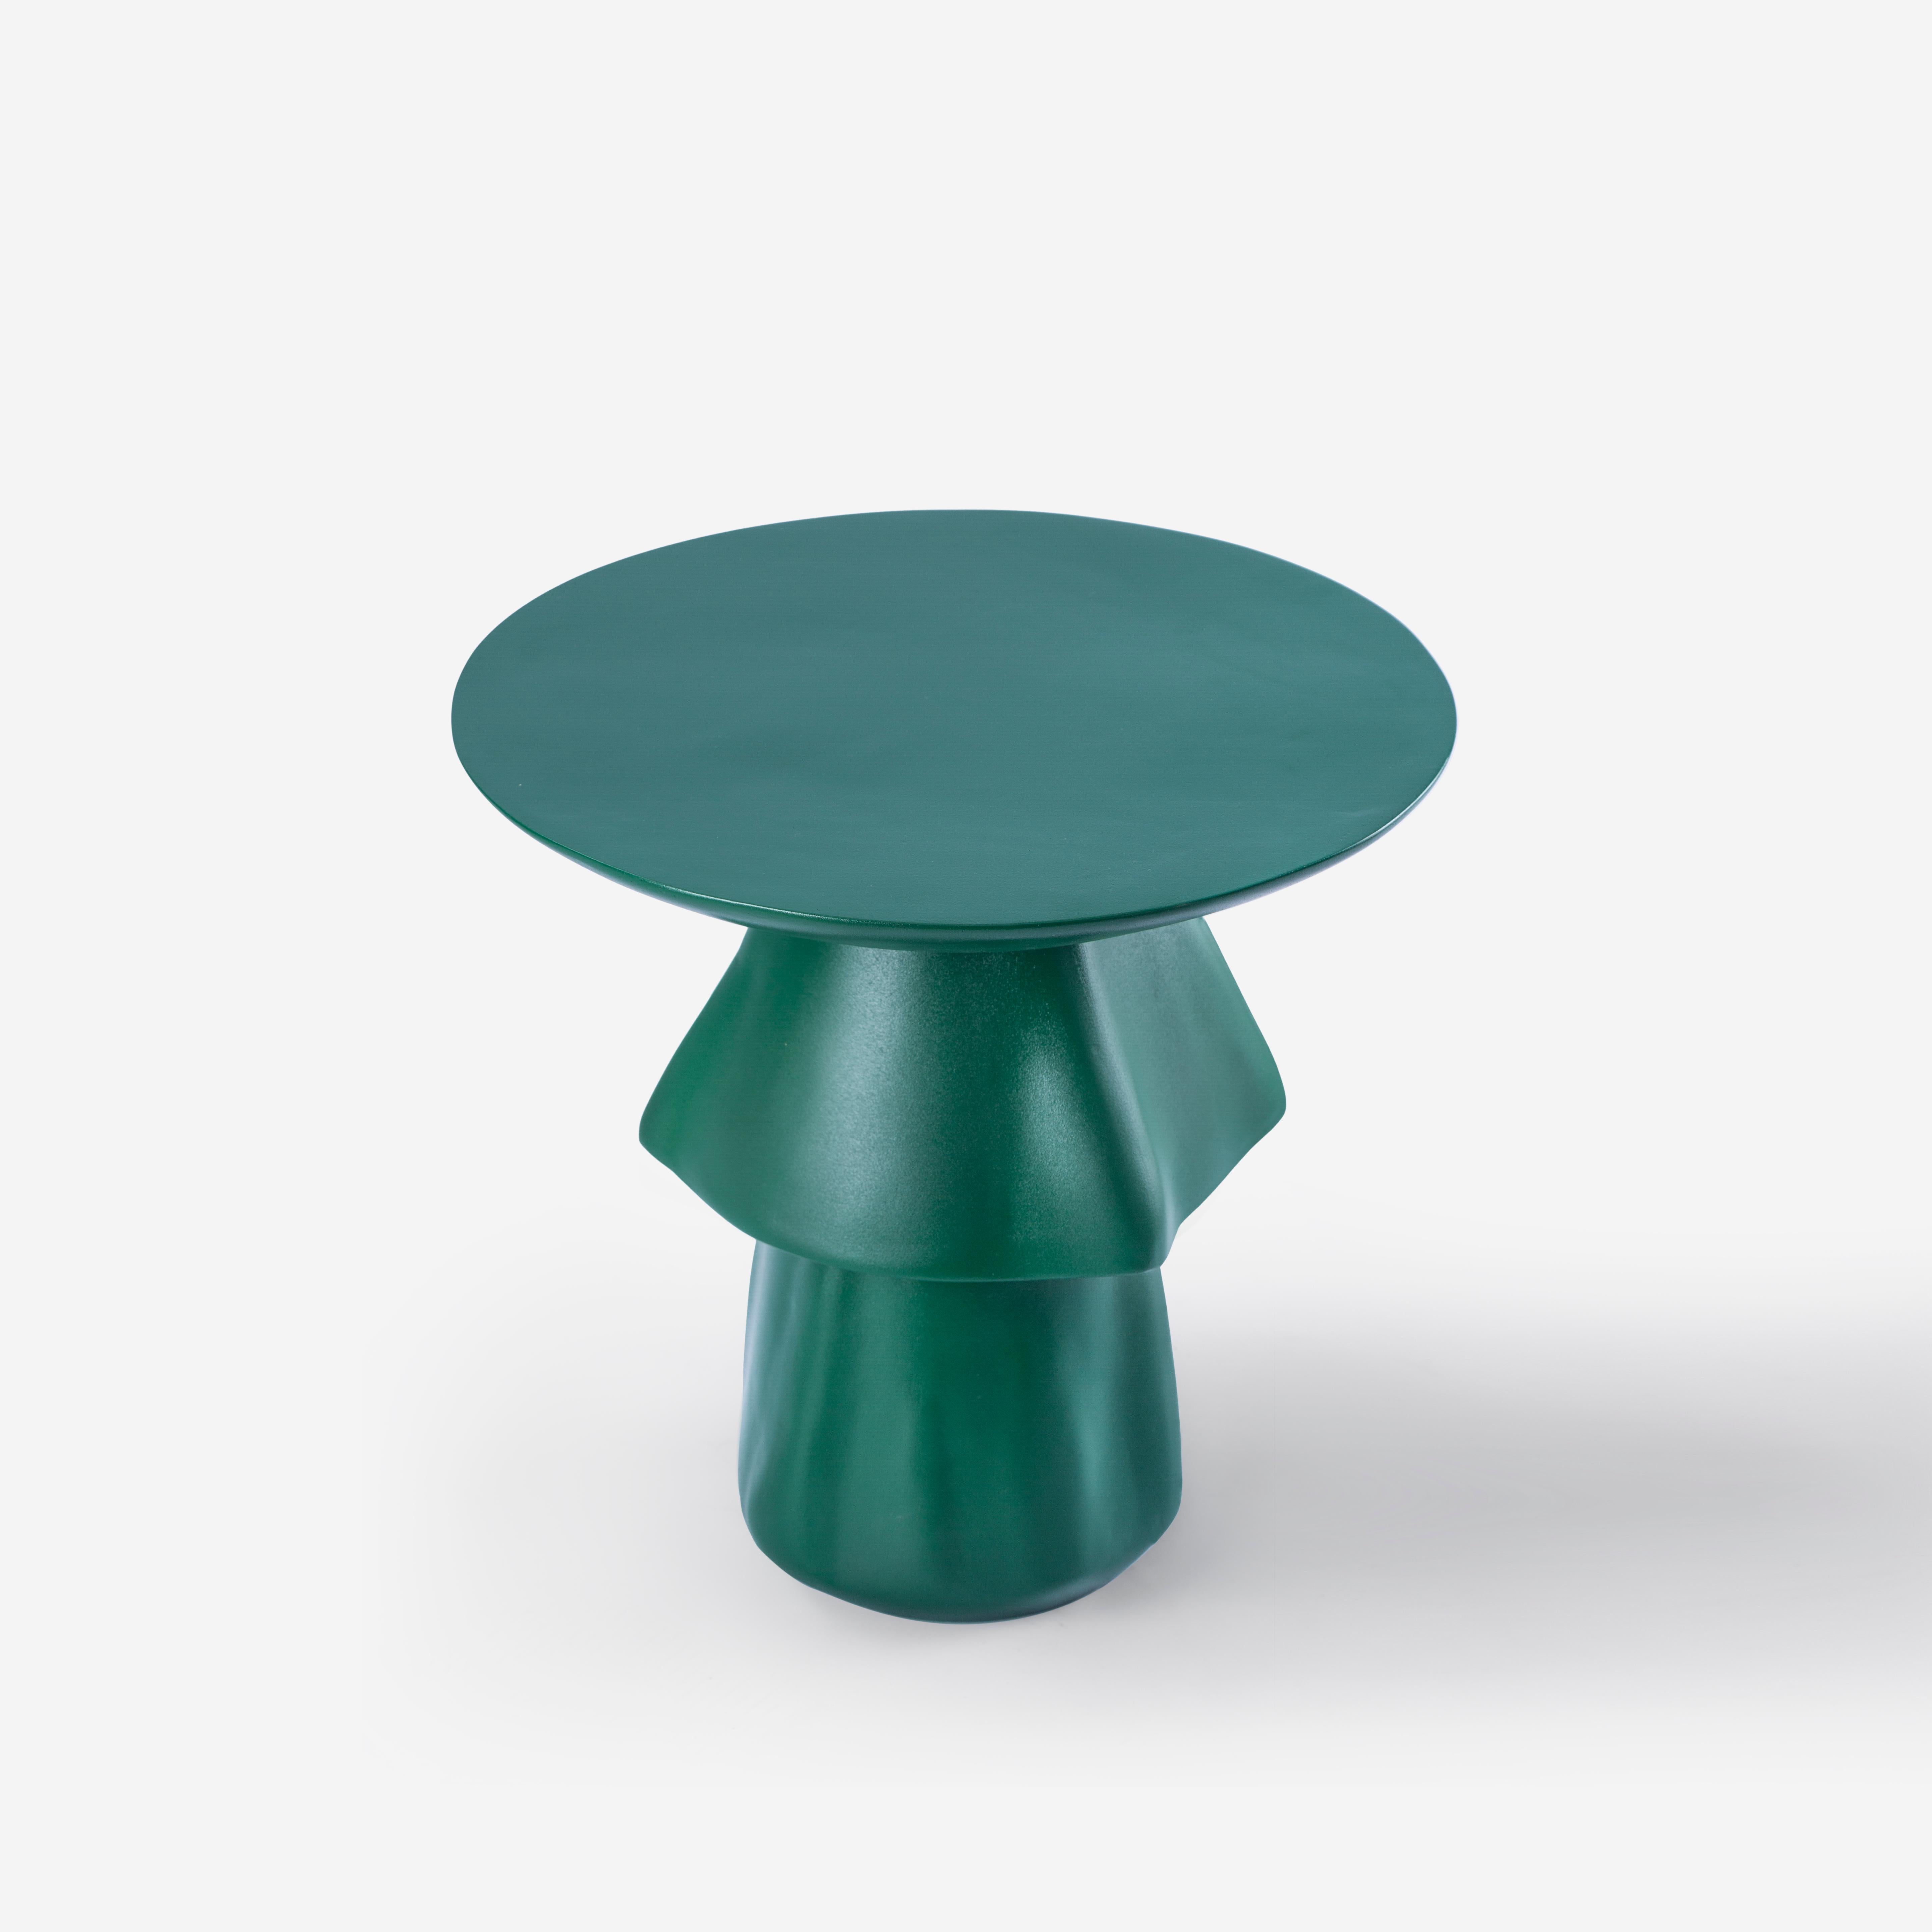 Deep green weather-resistant fiberglass outdoor side table - Tanoura

This cascading accent table resembles the Tanoura costume and dance of Upper Egypt. The multilayered weighted skirt of the Tanoura fans out like flower pedals as the dancers